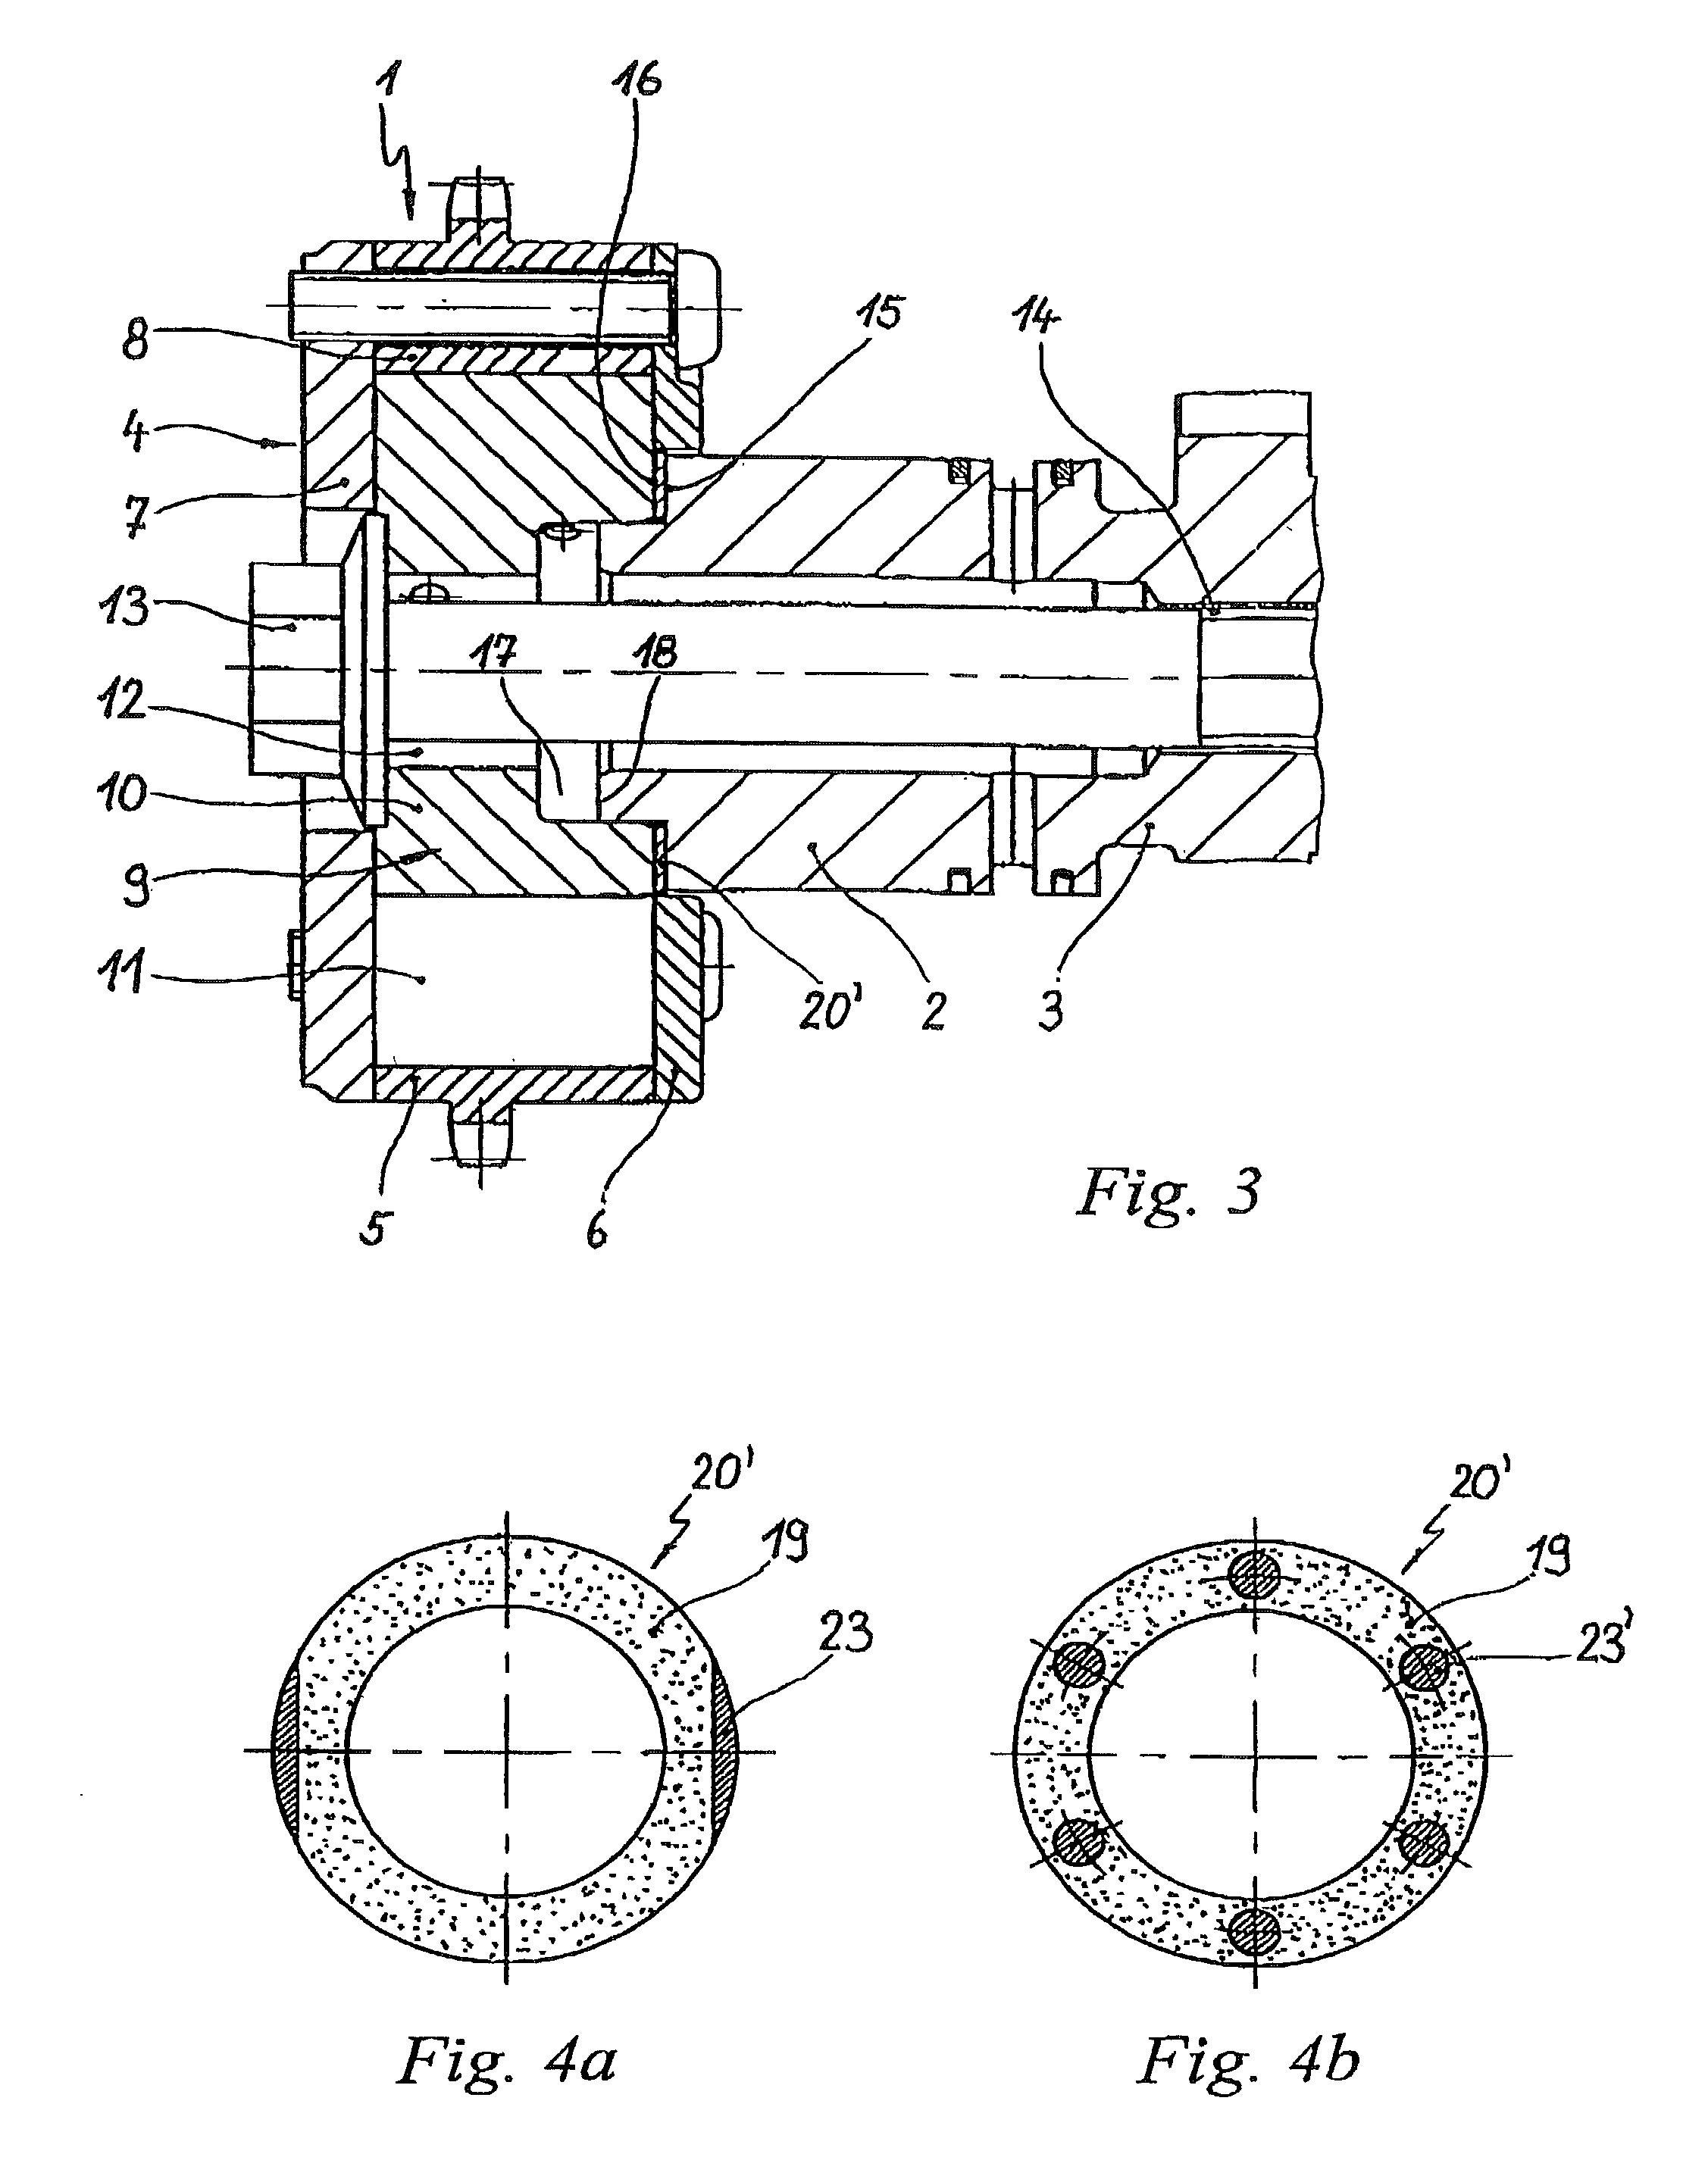 Internal combustion engine adjusting the rotation angle of a camshaft with respect to a crankshaft